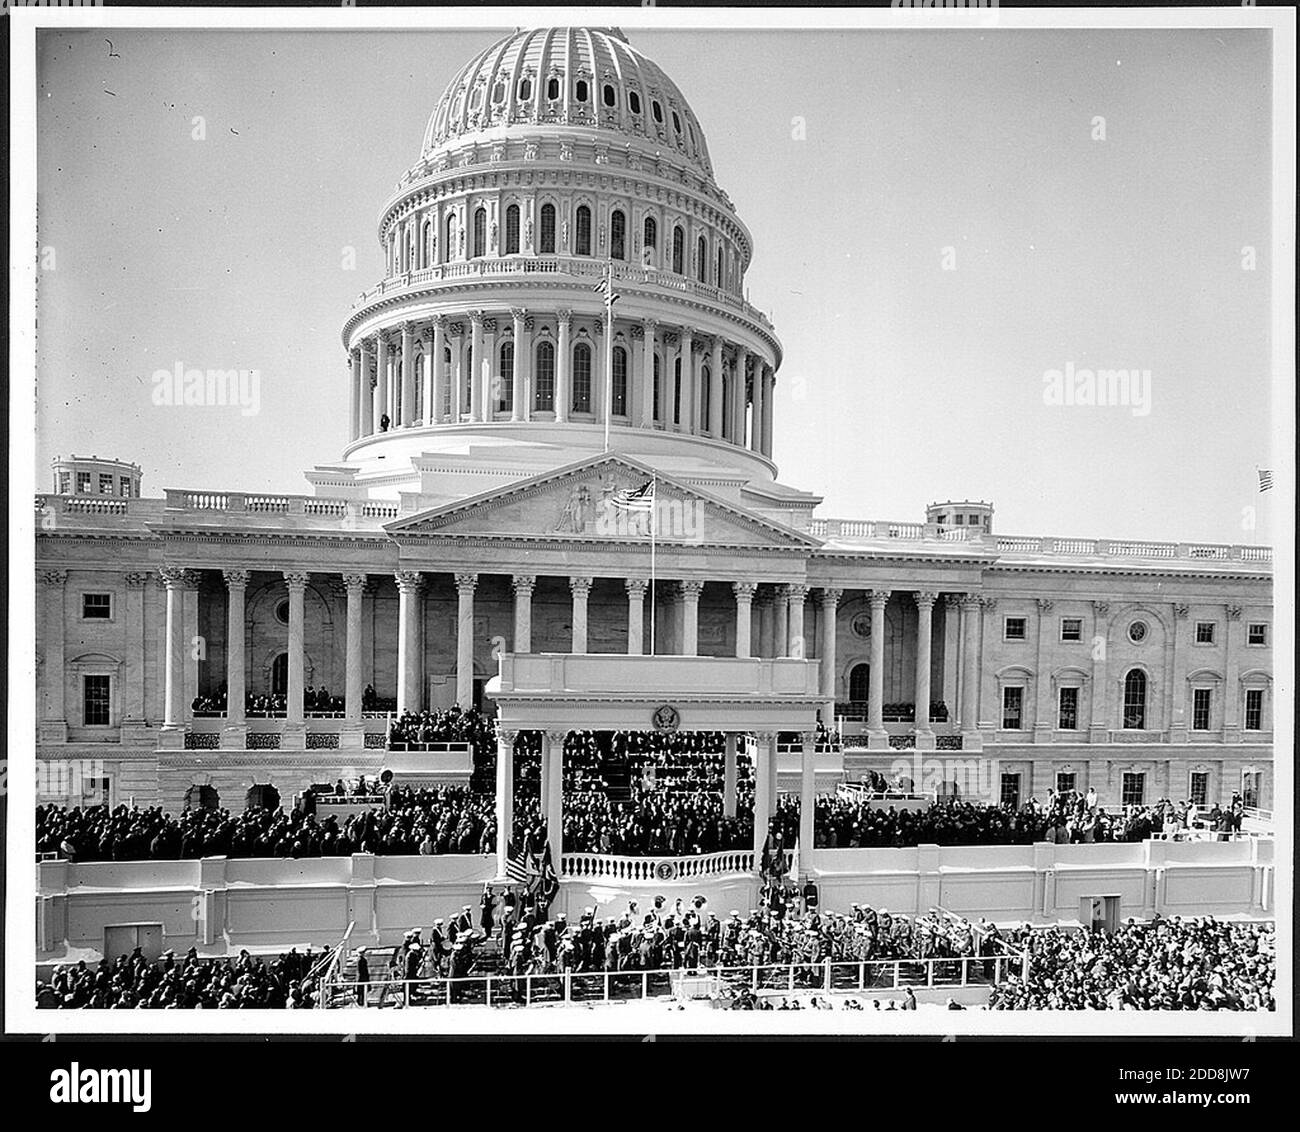 NO FILM, NO VIDEO, NO TV, NO DOCUMENTARY - Inauguration of US President John F. Kennedy takes place on the east portico of the U.S. Capitol in Washington, D.C., USA on January 20, 1961. Photo by Library of Congress/MCT/ABACAPRESS.COM Stock Photo